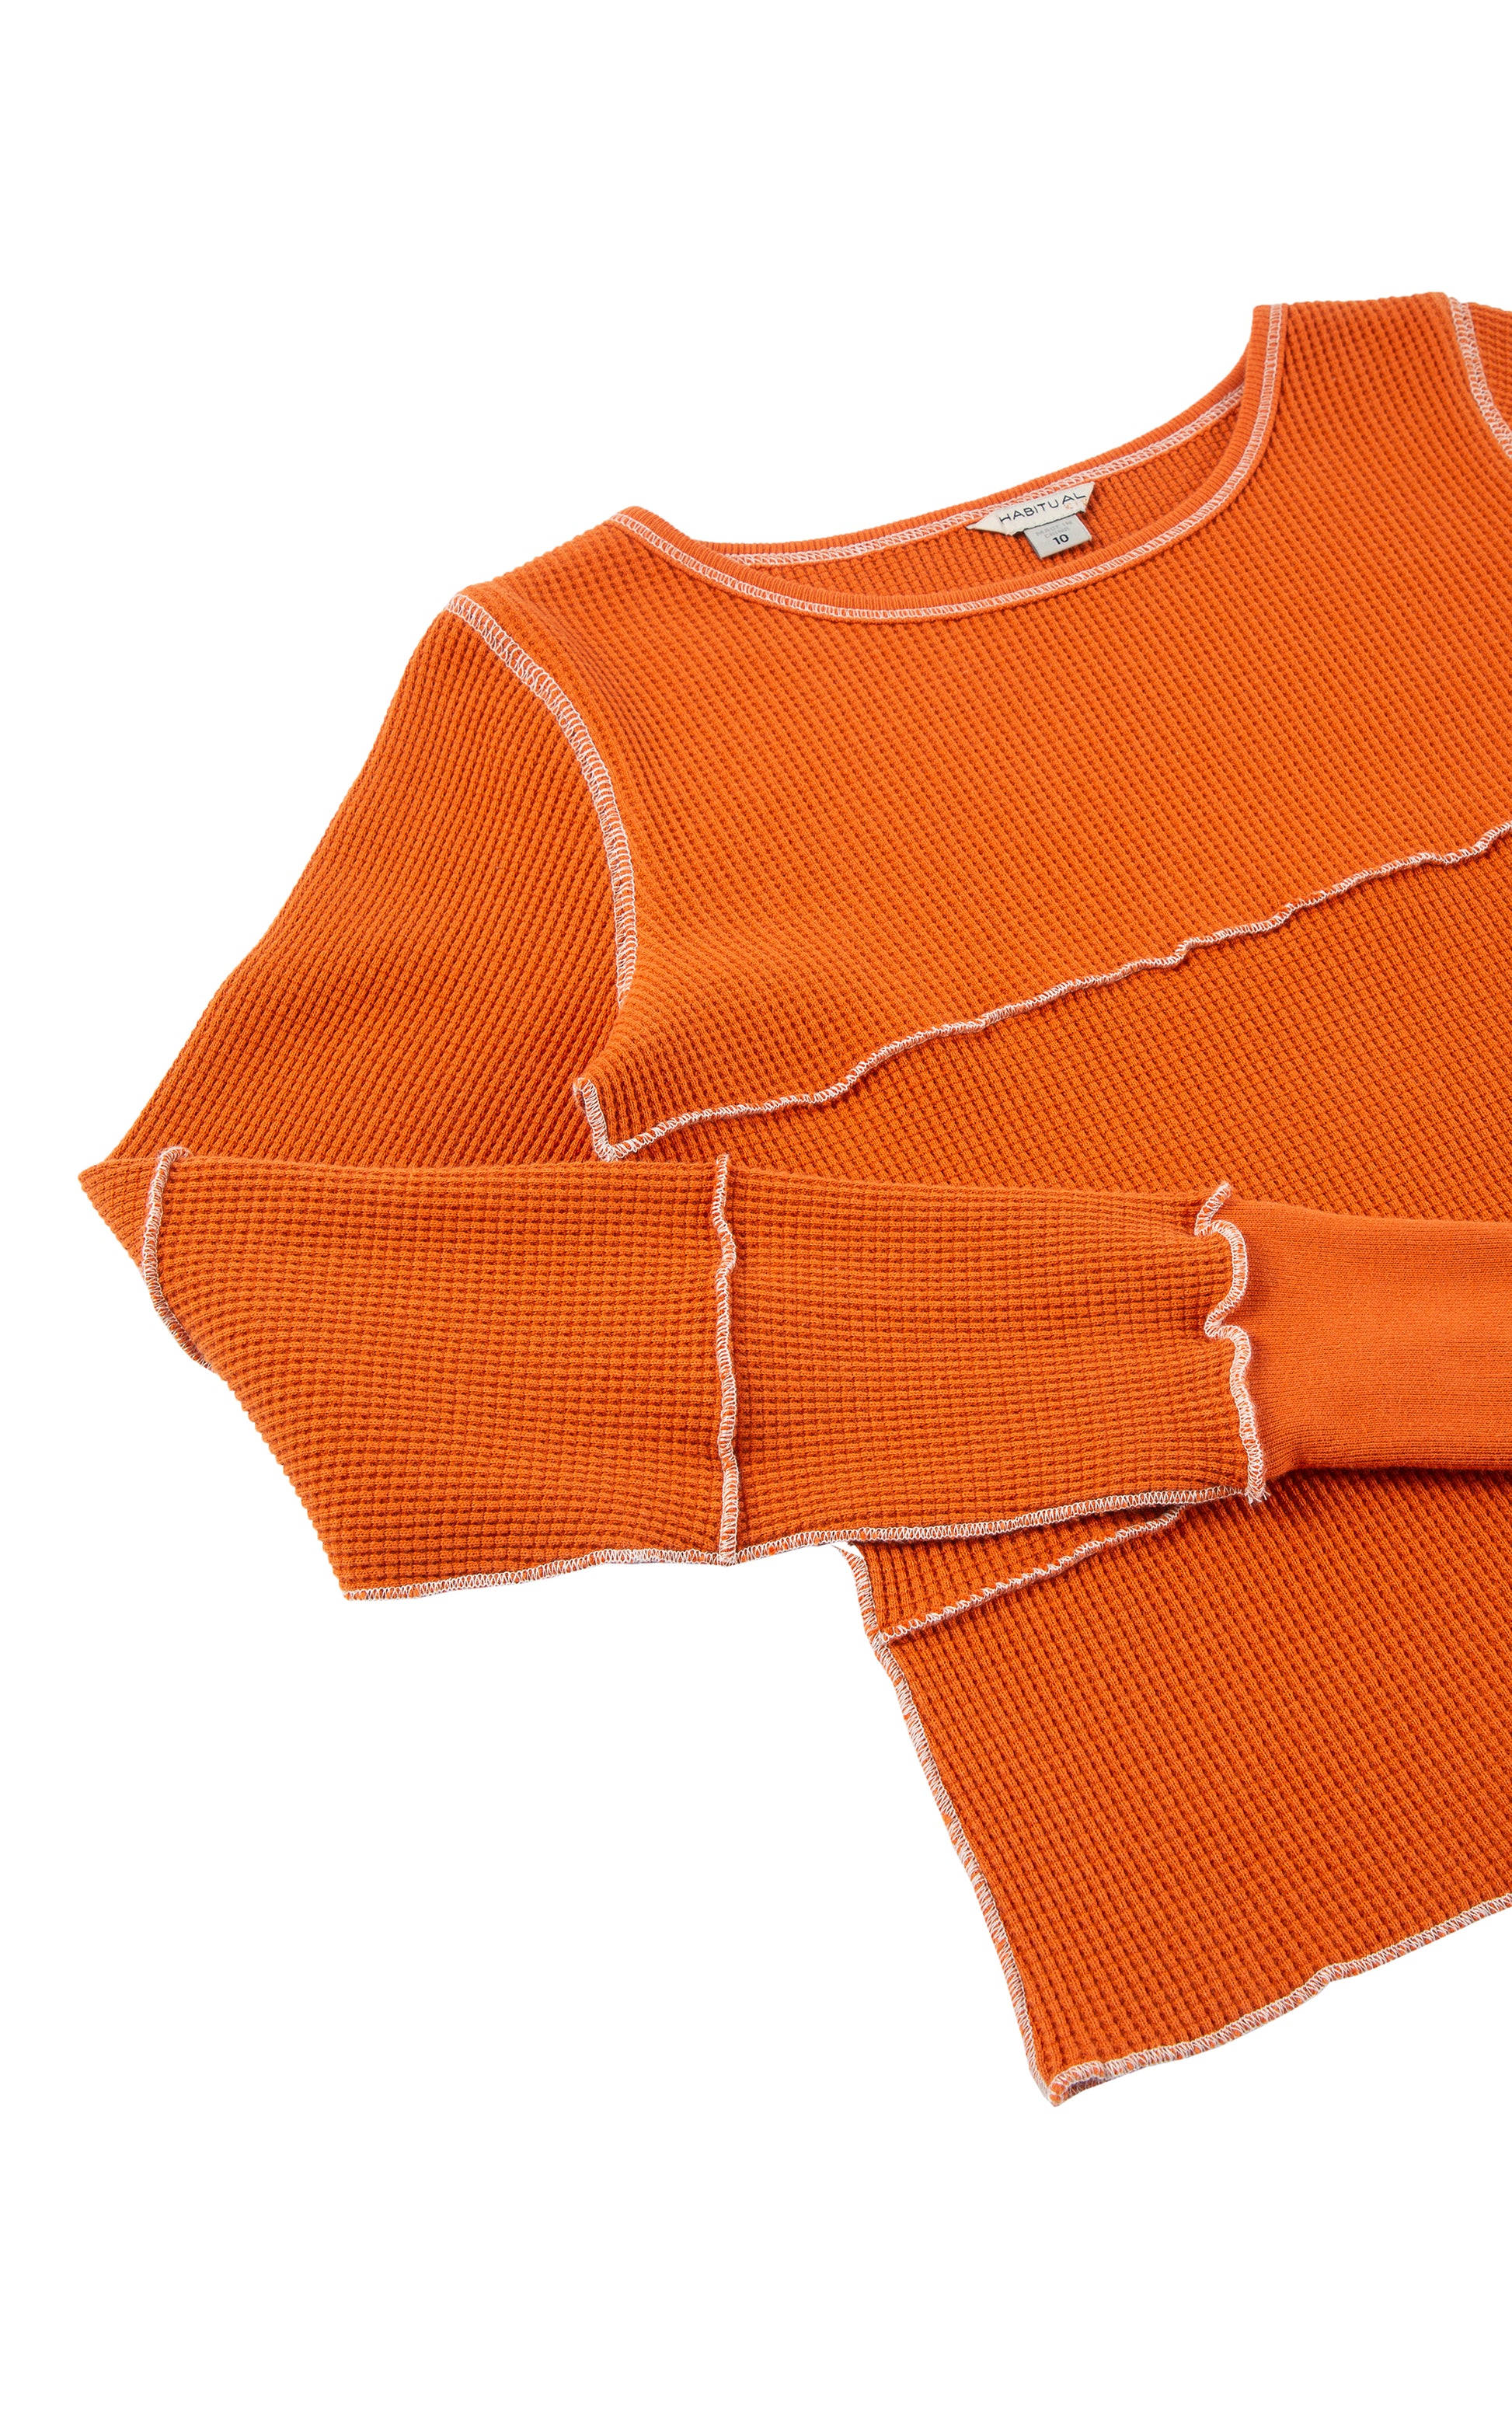 Close up view of orange long sleeve with white stitching 